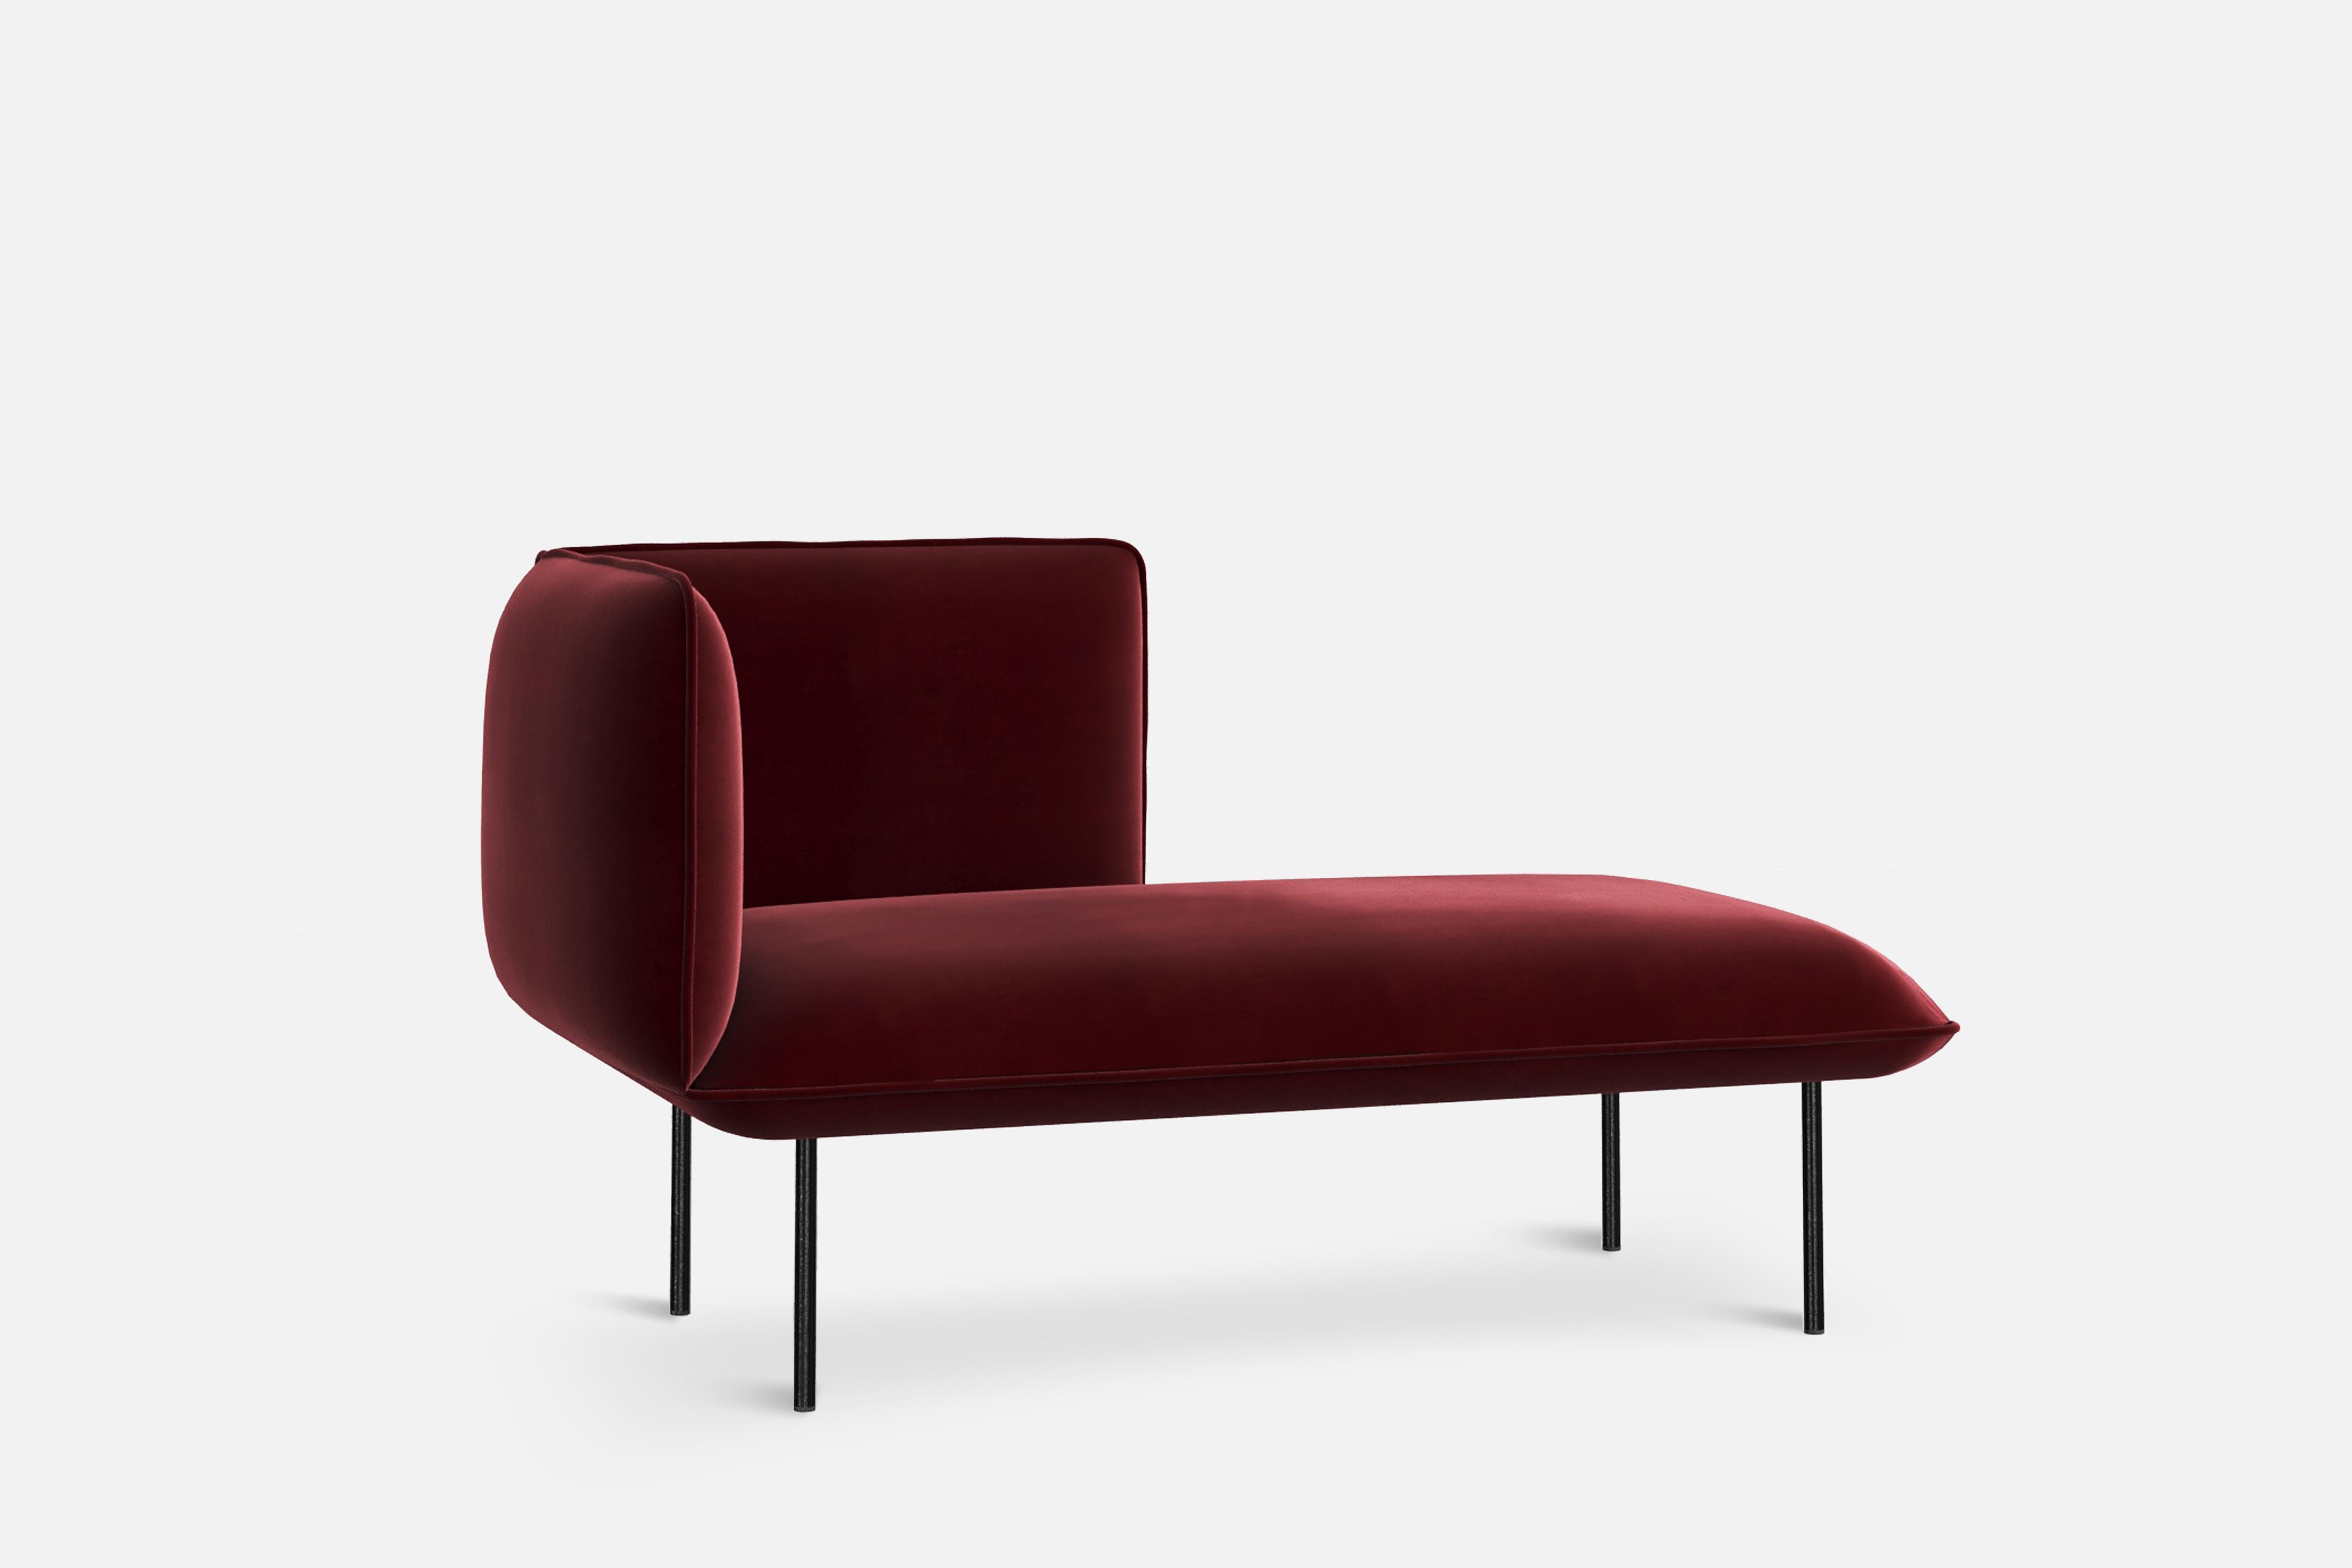 Nakki lobby chaise longue Left by Mika Tolvanen
Materials: foam, plywood, elastic belts, memory foam, fabric (Harald 3)
Dimensions: D 78 x W 150 x H 82 cm.
Also available in different colors and materials. 

The founders, Mia and Torben Koed,